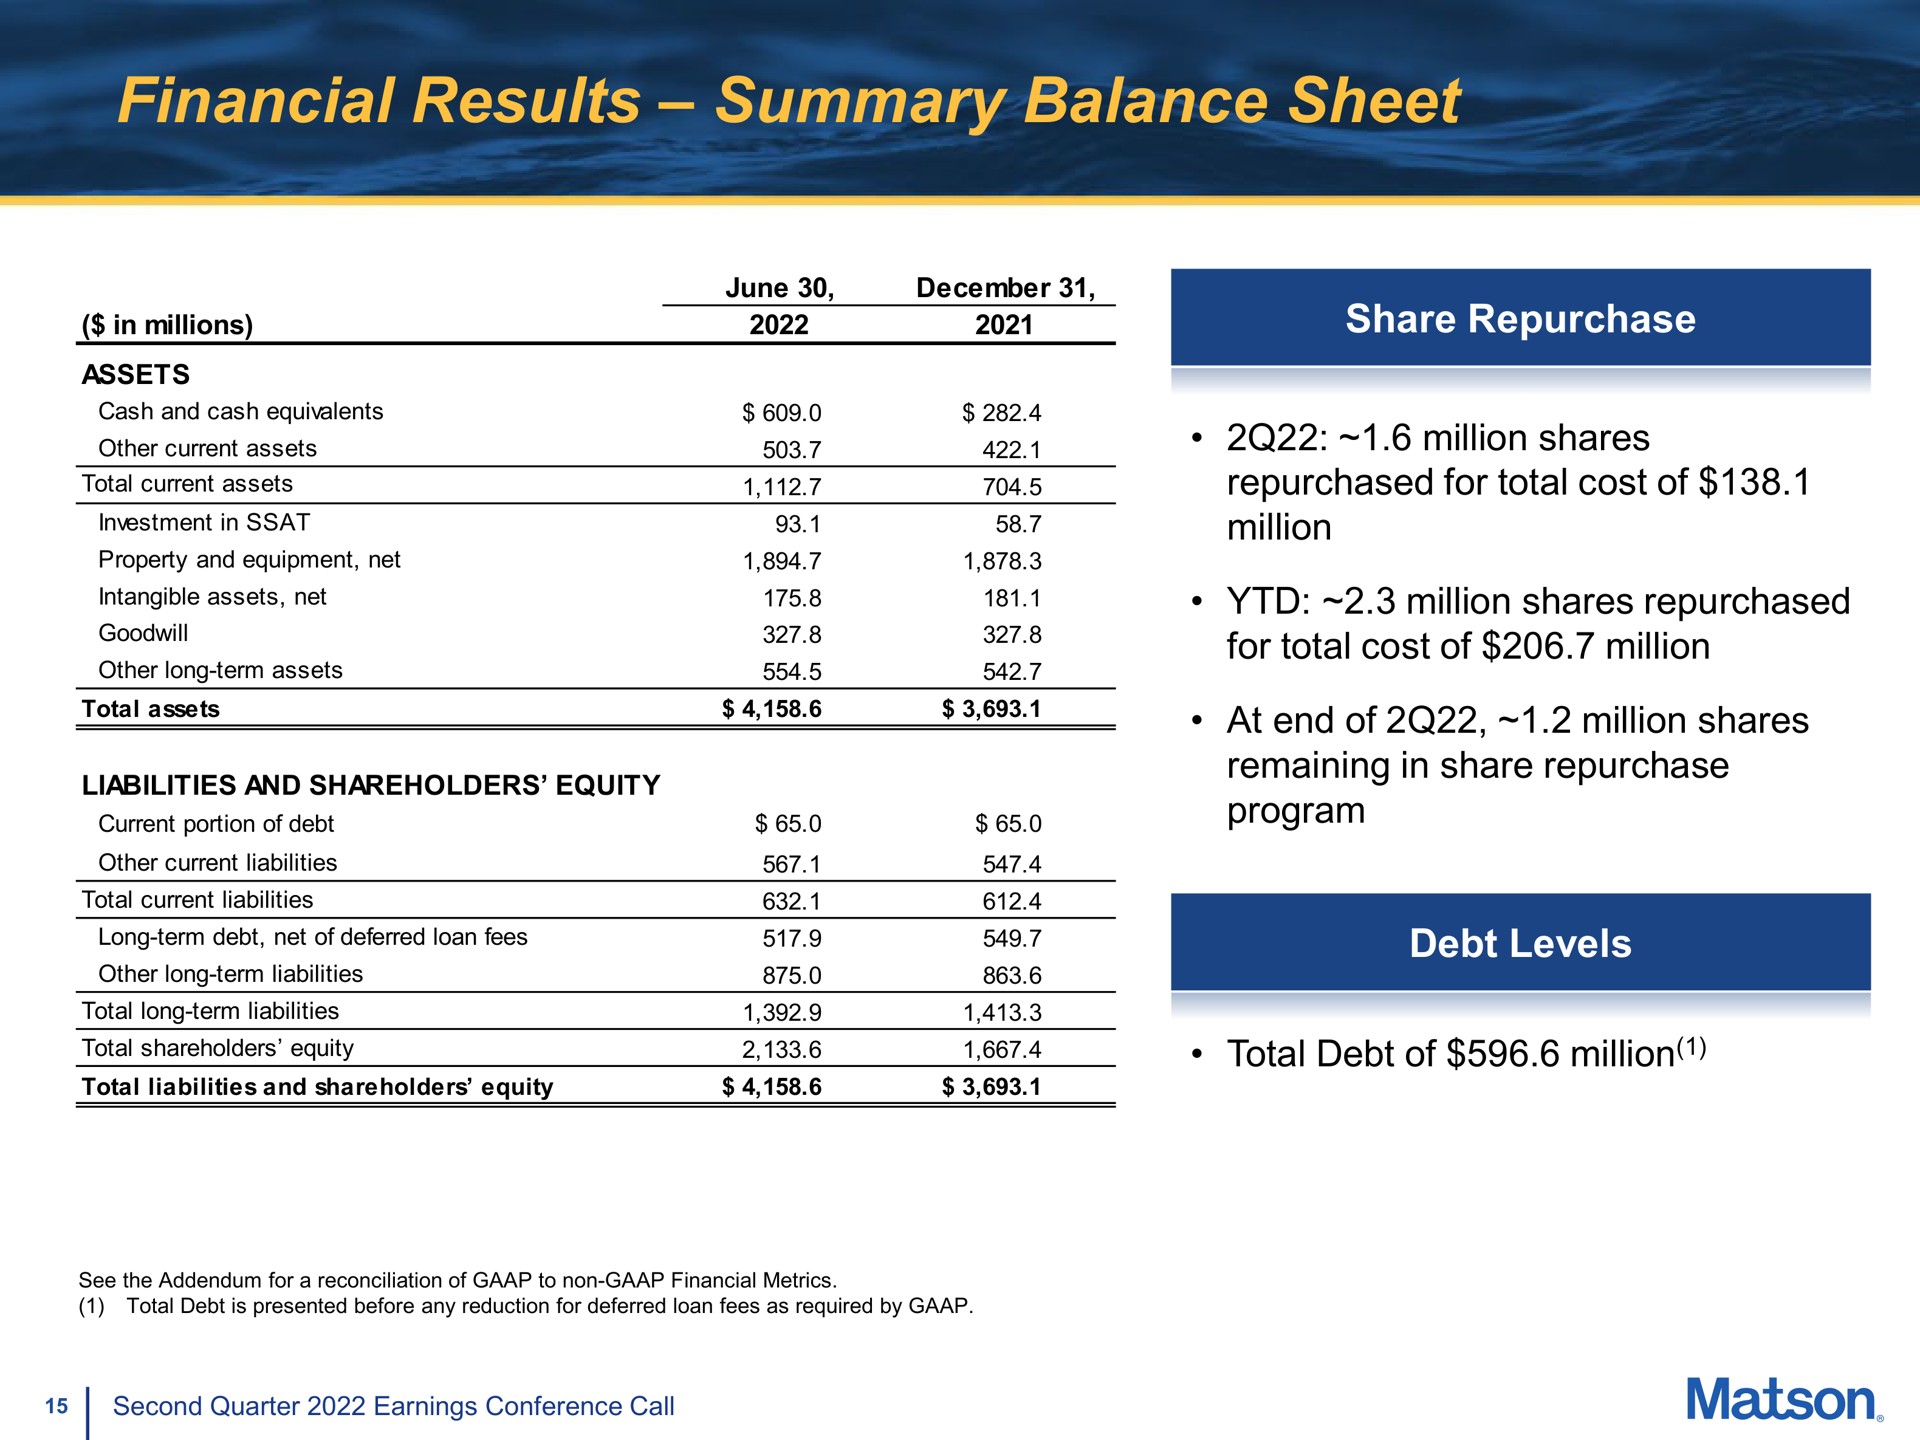 financial results summary balance sheet for total cost of million | Matson